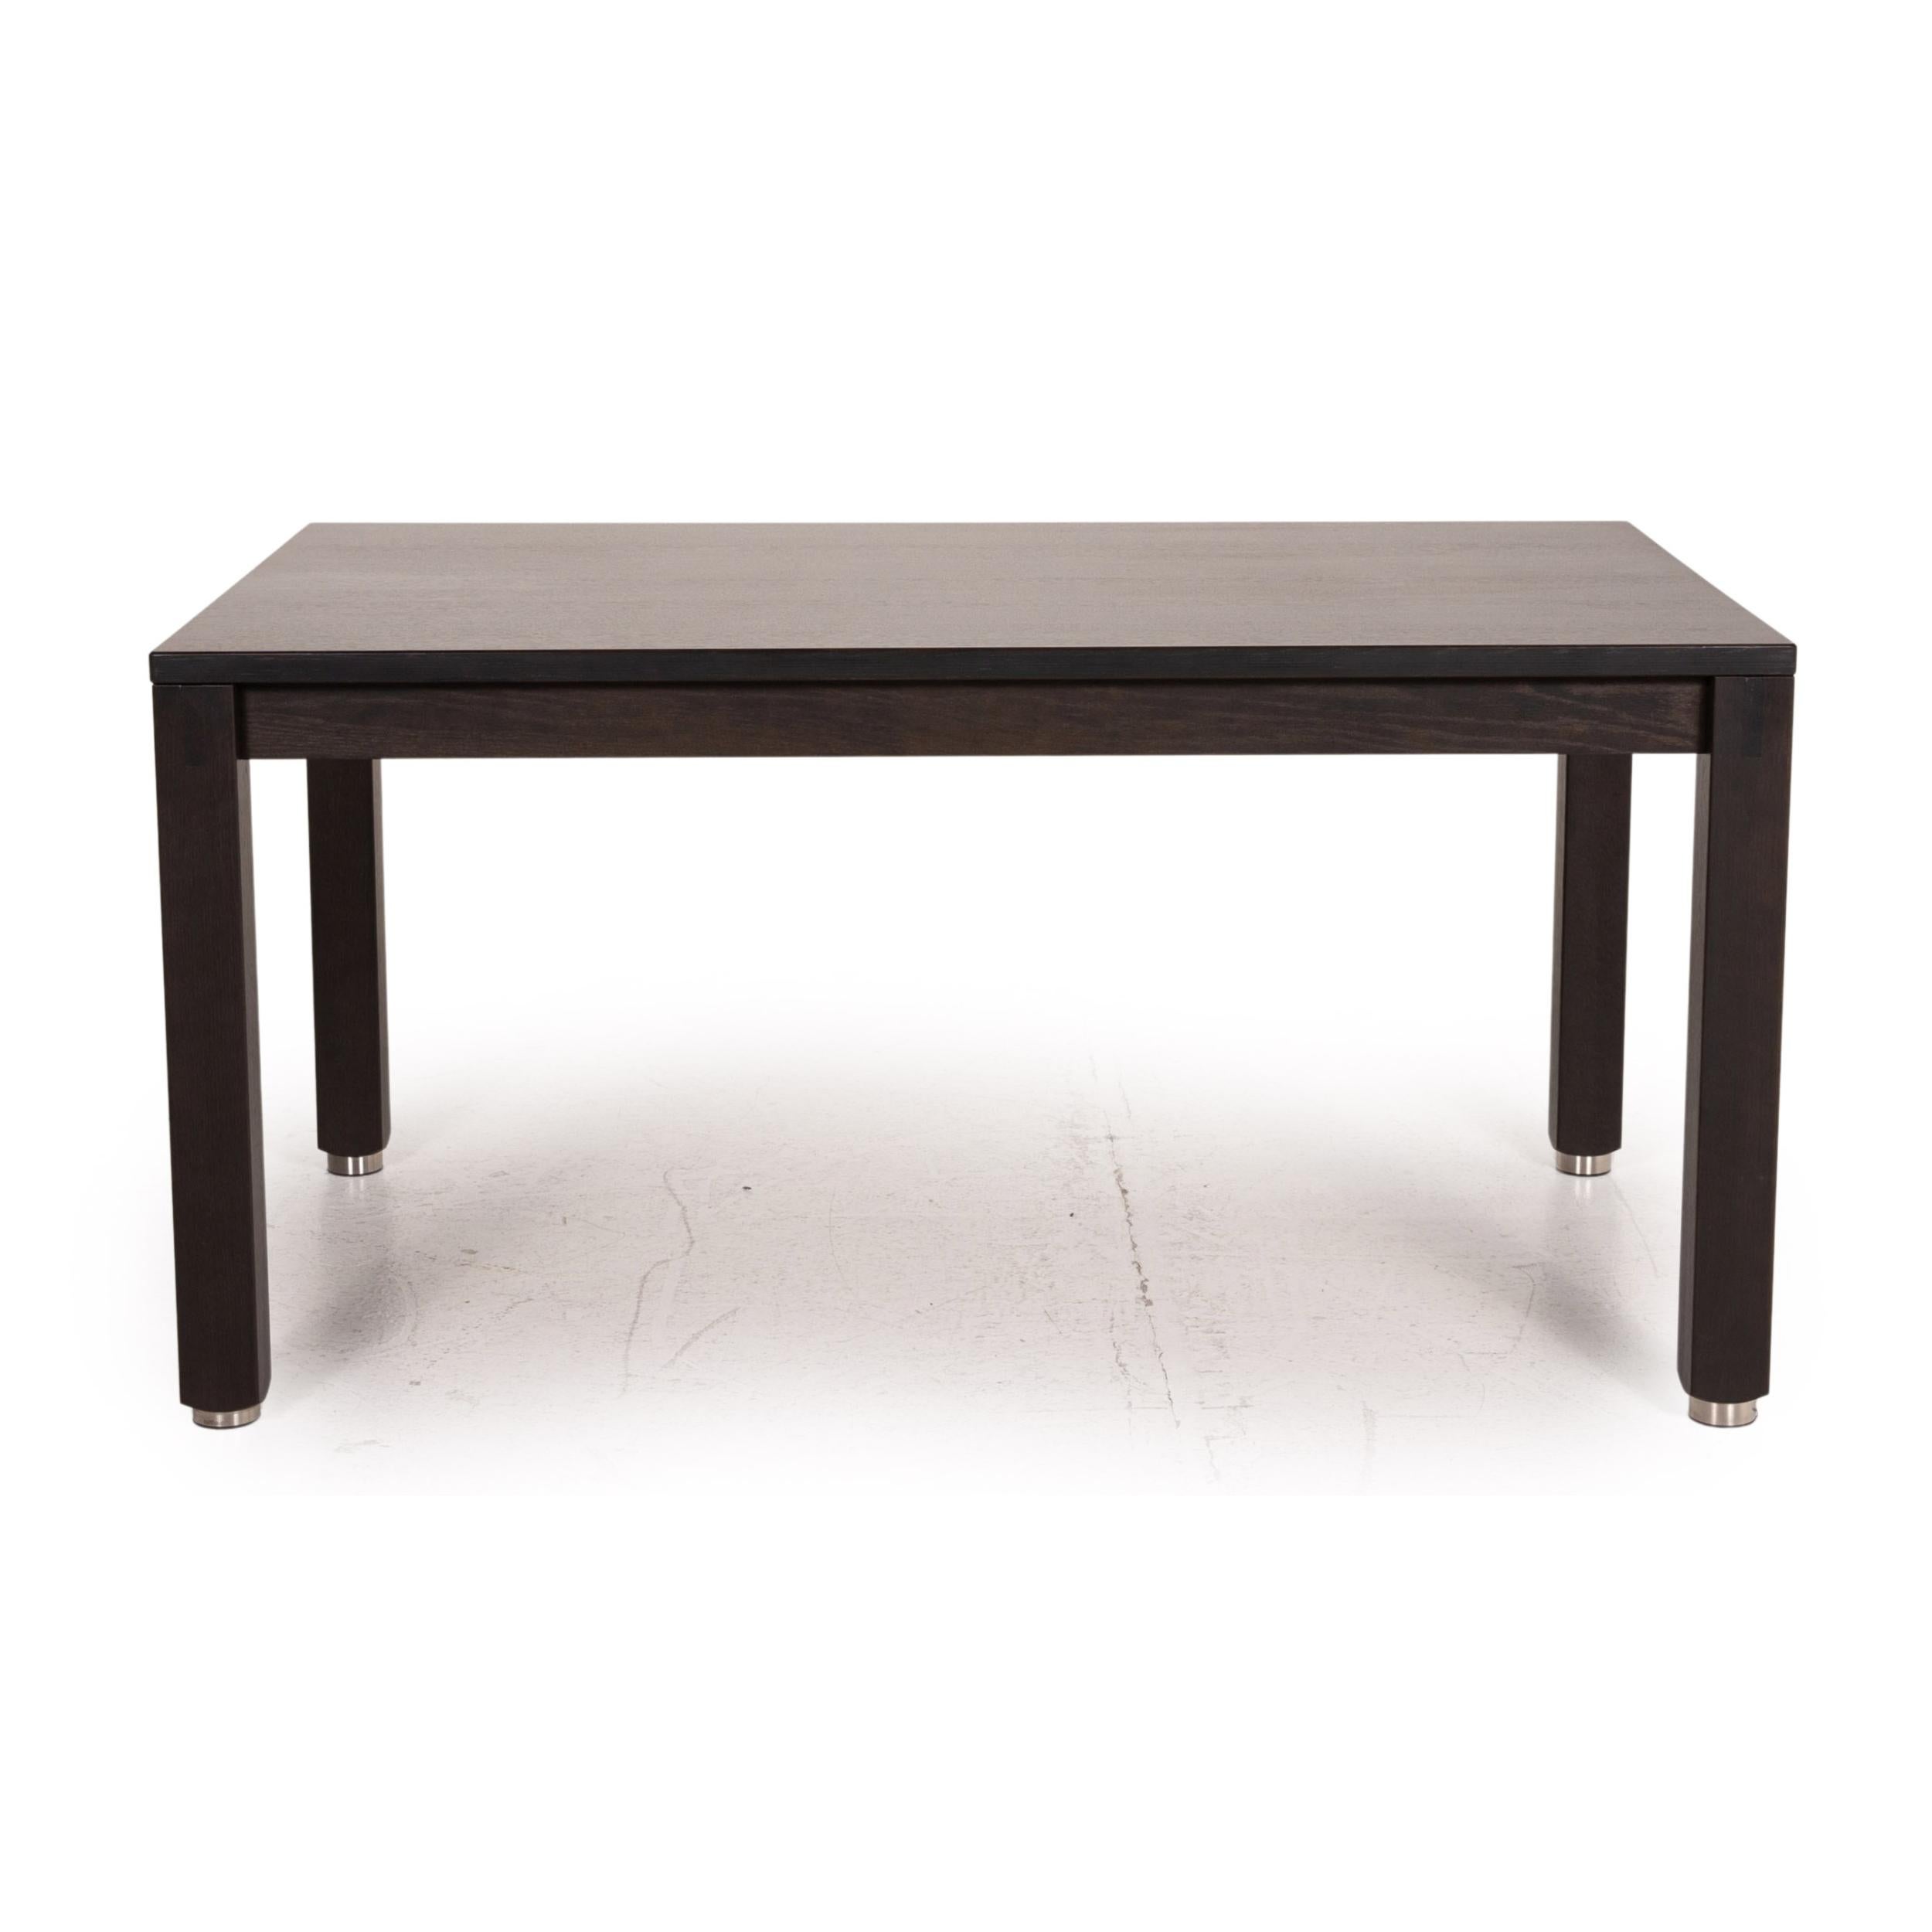 Contemporary Bulthaup Corpus Dining Table Dark Brown Brown Table For Sale